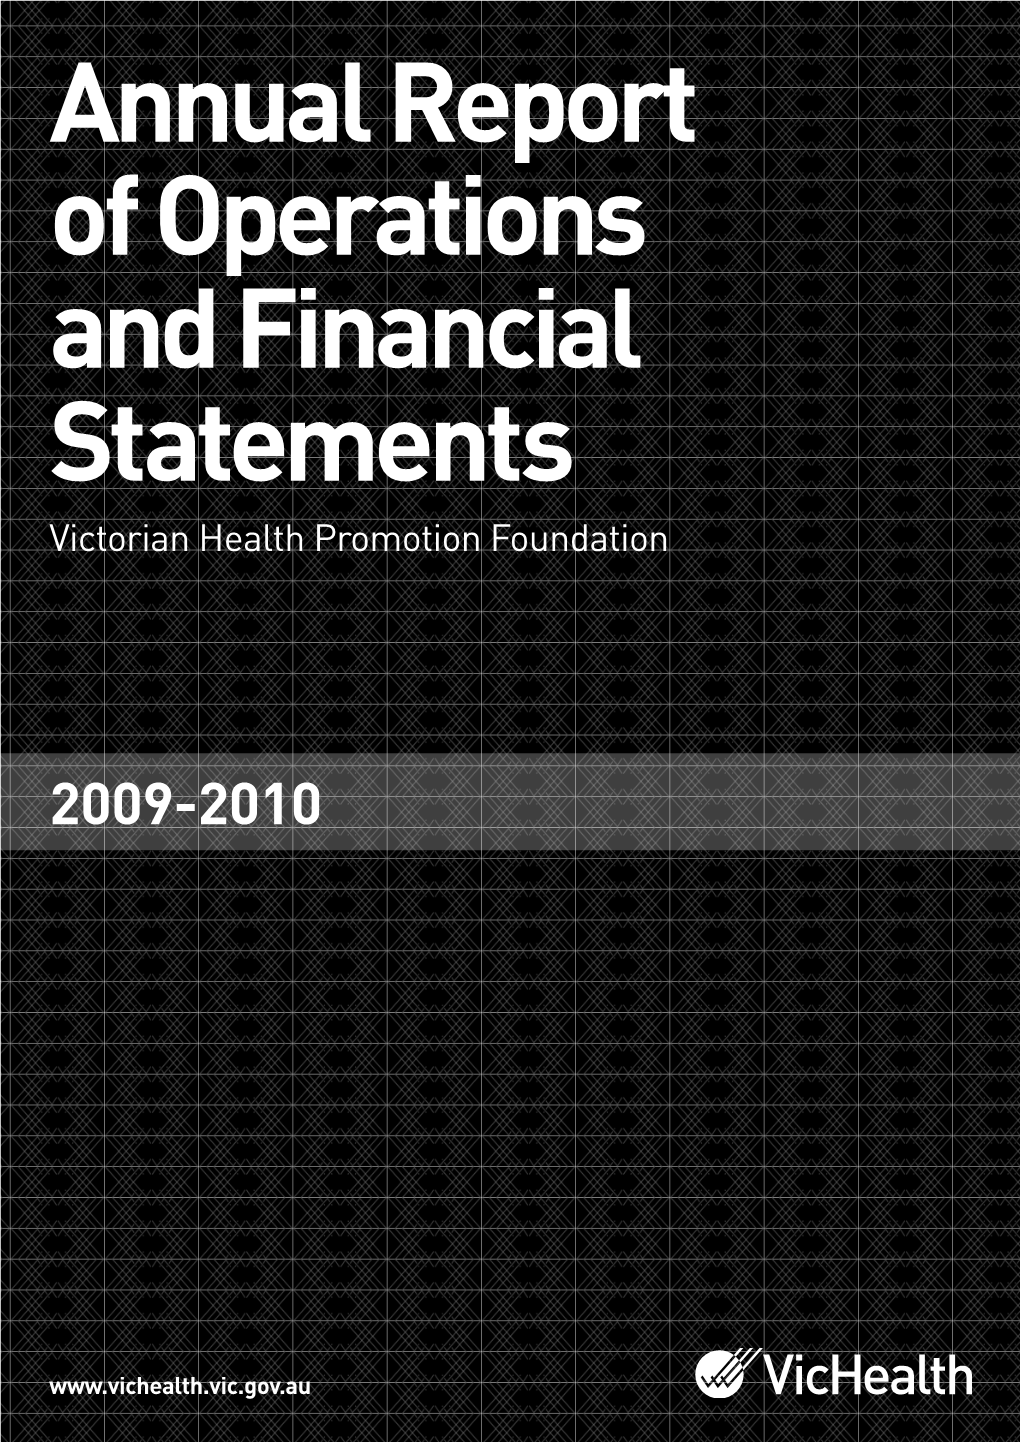 Annual Report of Operations and Financial Statements Victorian Health Promotion Foundation